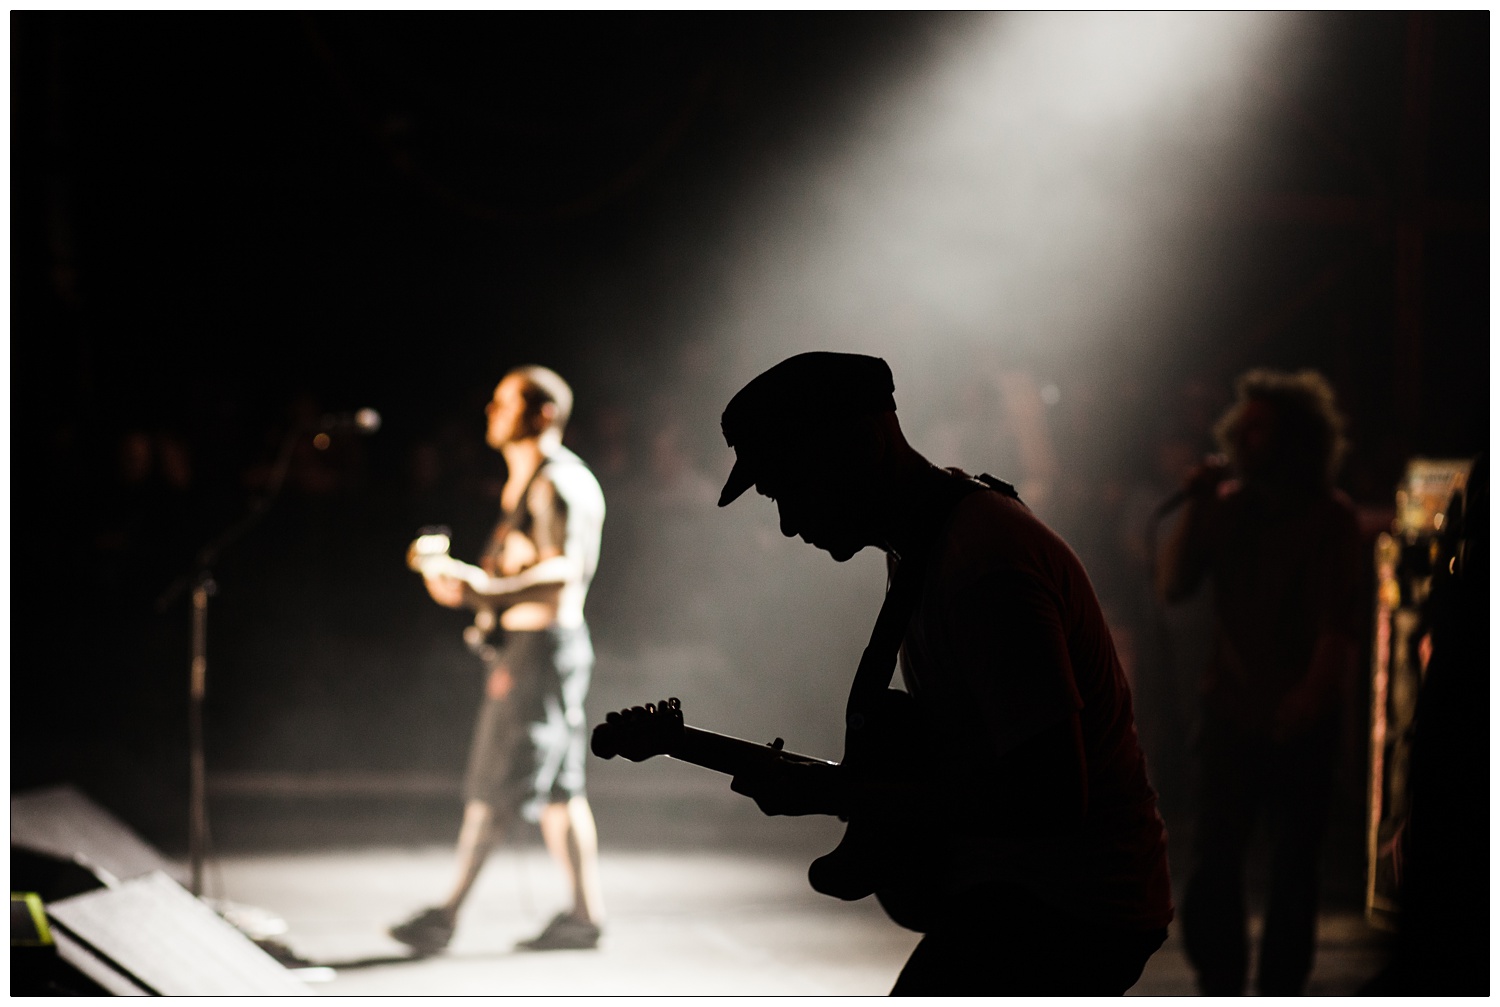 Silhouette of Tom Morello playing in 2010, Tim Commerford and Zack de la Rocha in the background.